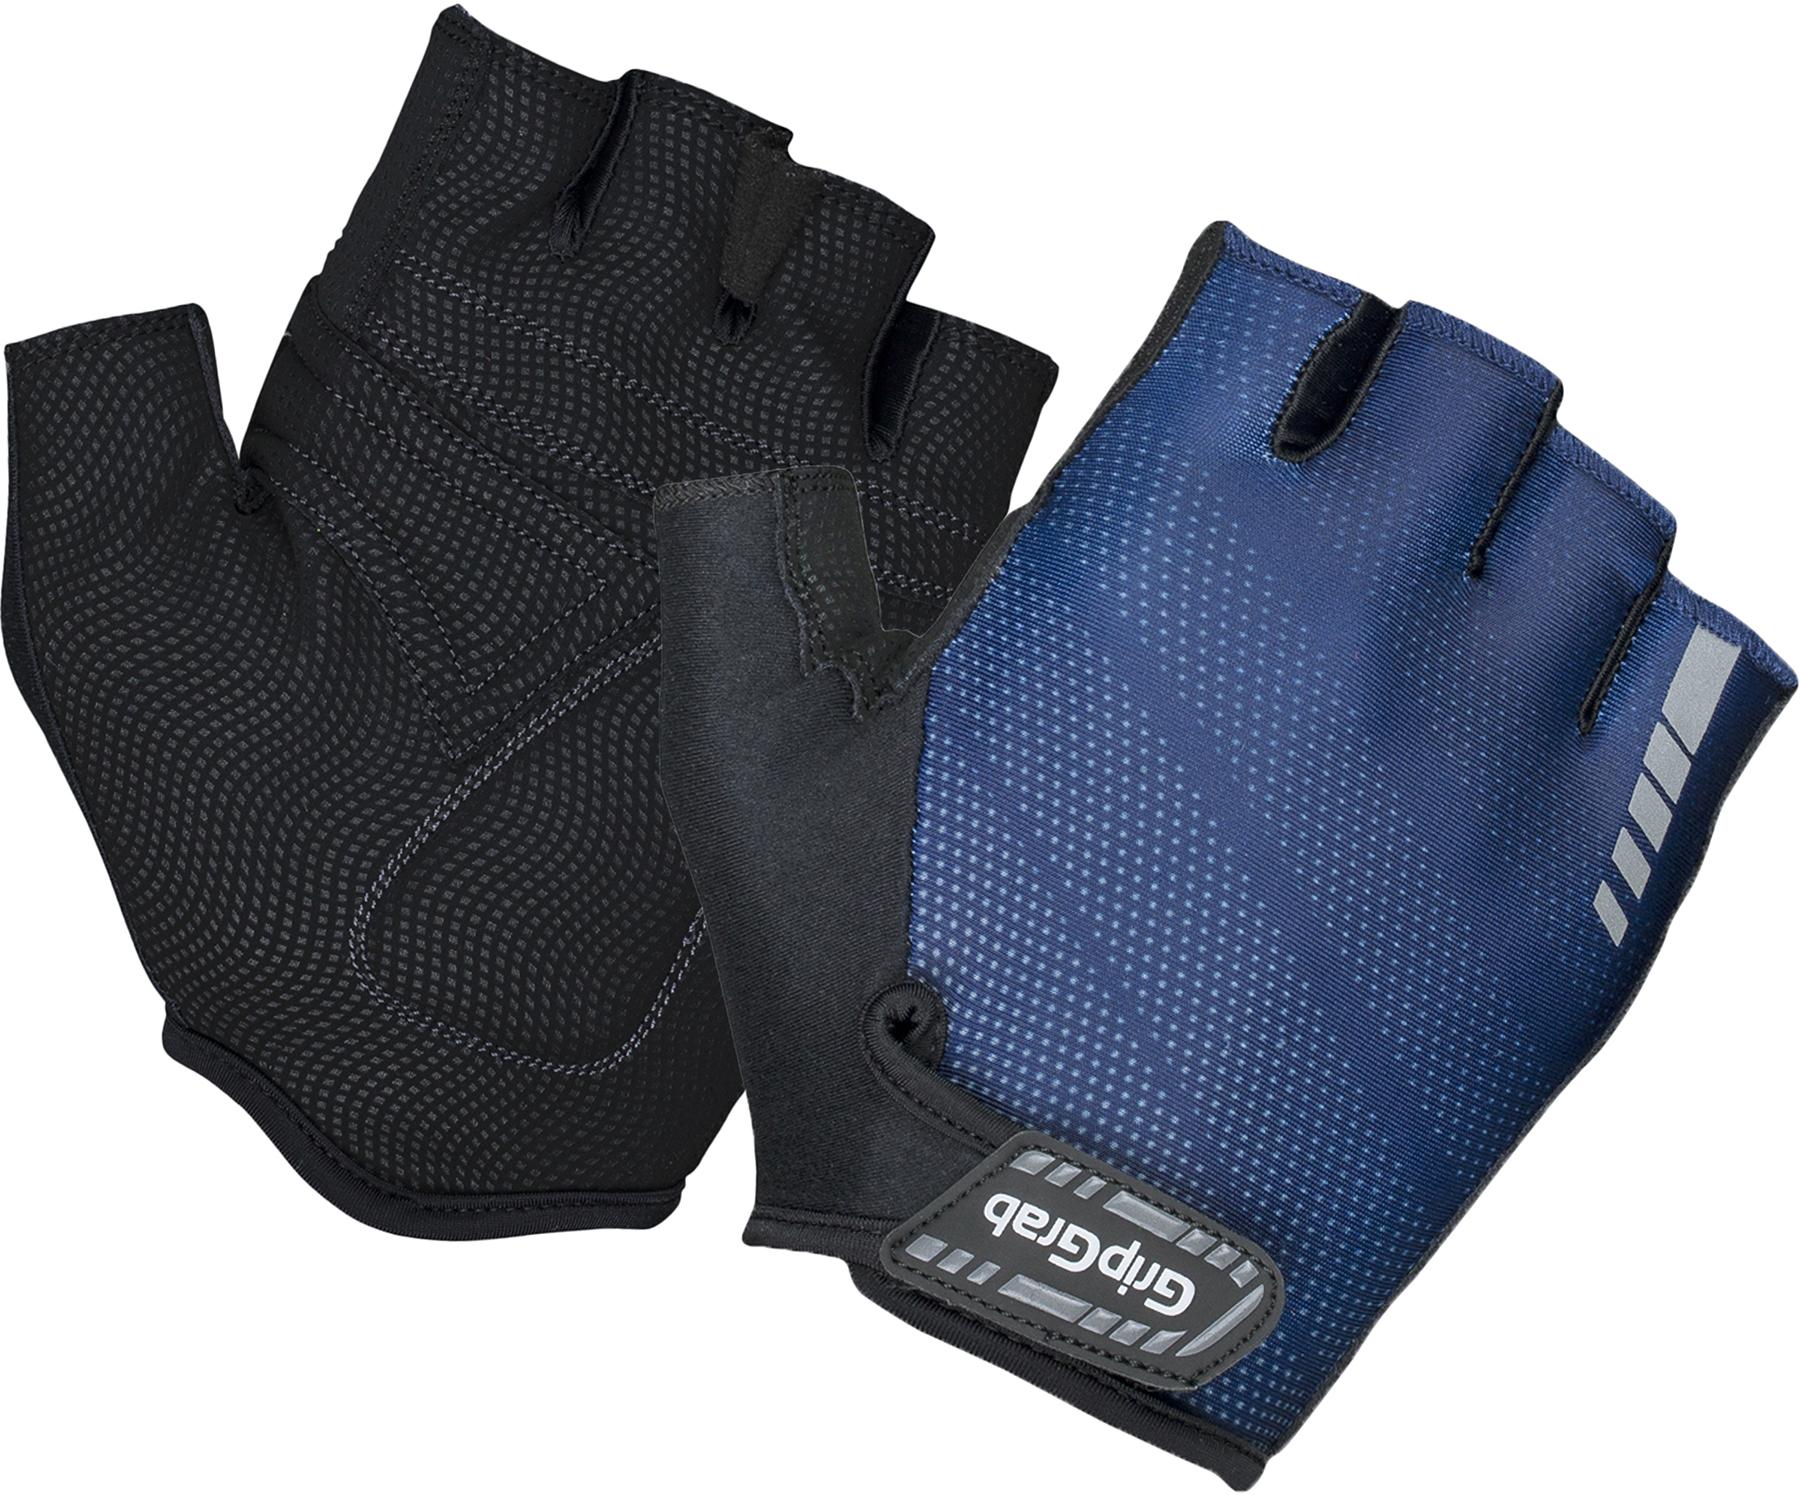 Gripgrab Rouleur Padded Glove  Navy